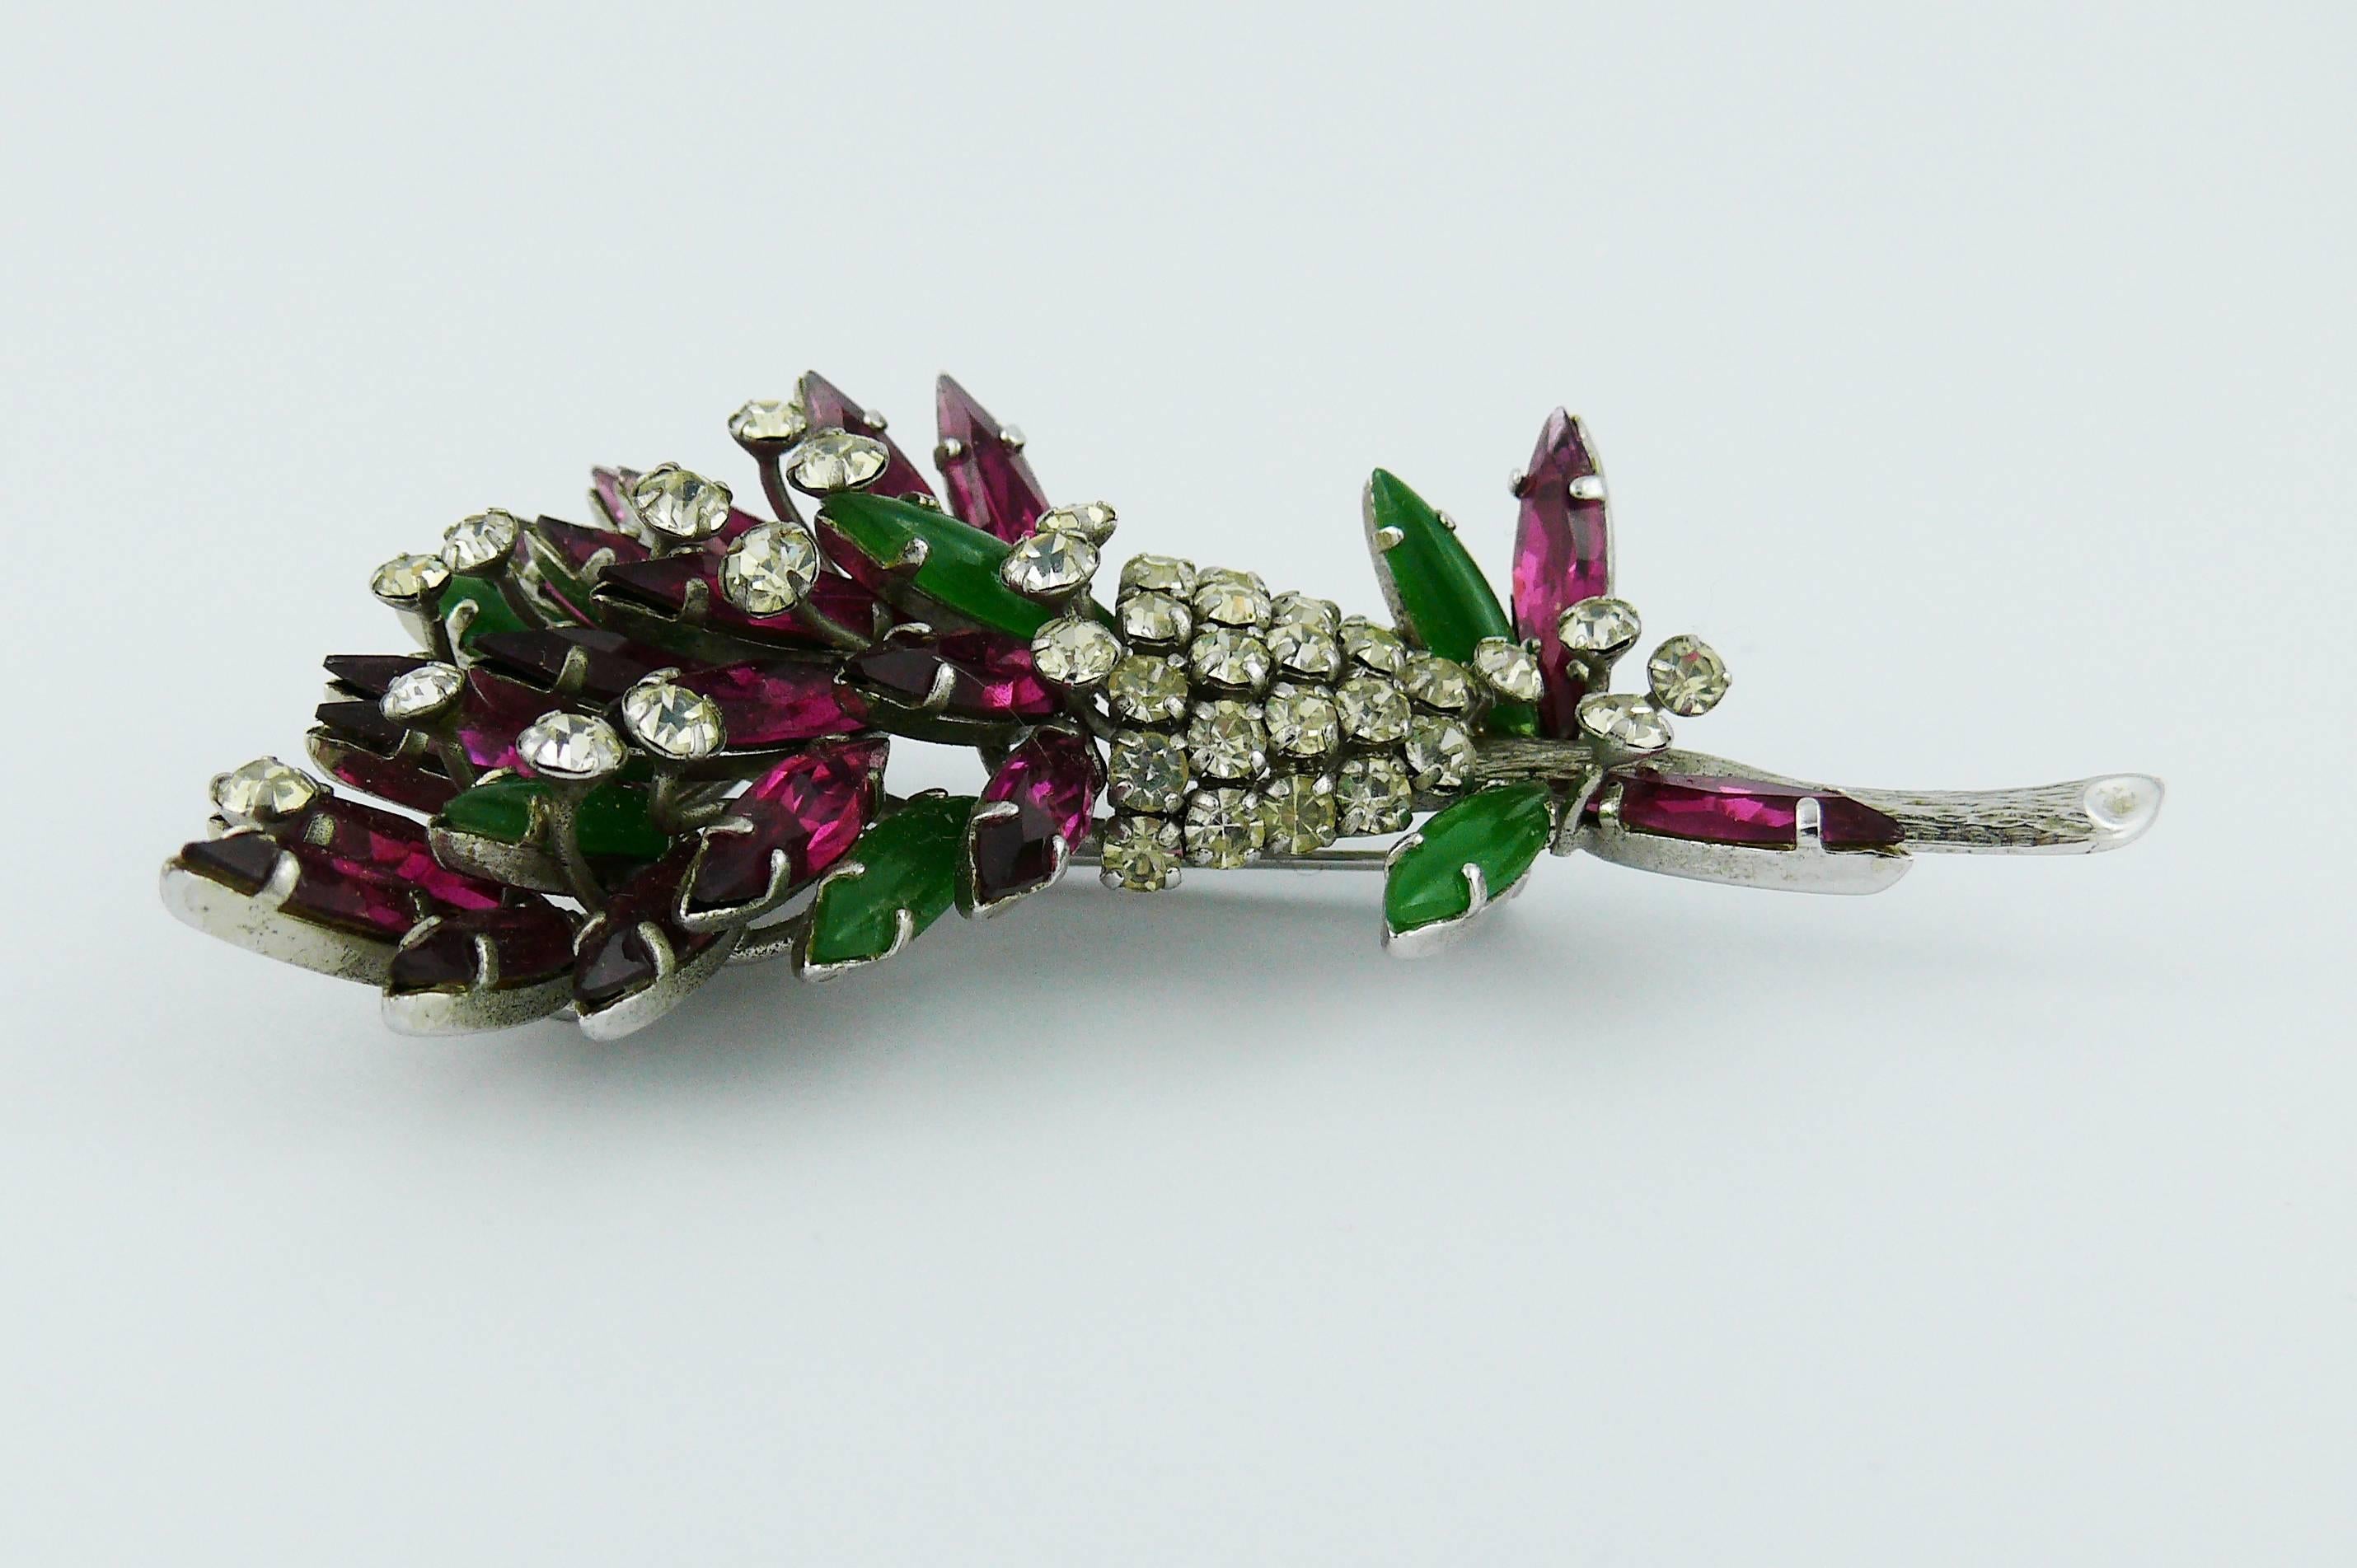 CHRISTIAN DIOR vintage floral brooch featuring multicolored crystals in a silver toned setting.

Marked 19 CHR. DIOR 68 Germany.

Indicative measurements : length approx. 7.2 cm (2.83 inches) / max. width approx. 3.4 cm (1.34 inches).

JEWELRY